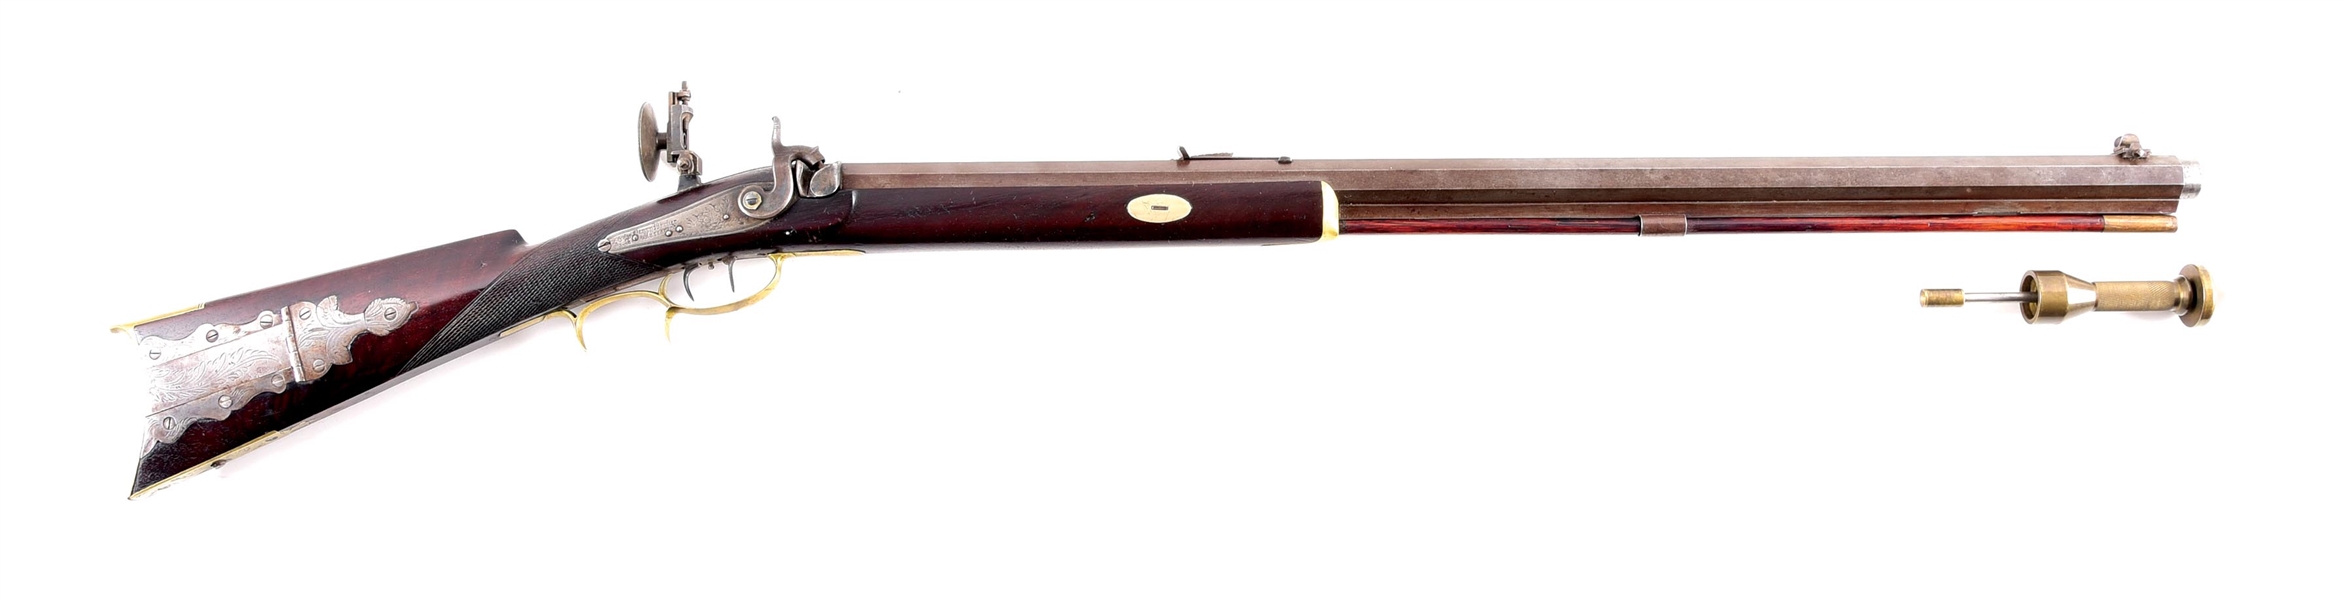 (A) TRYON PERCUSSION TARGET RIFLE.